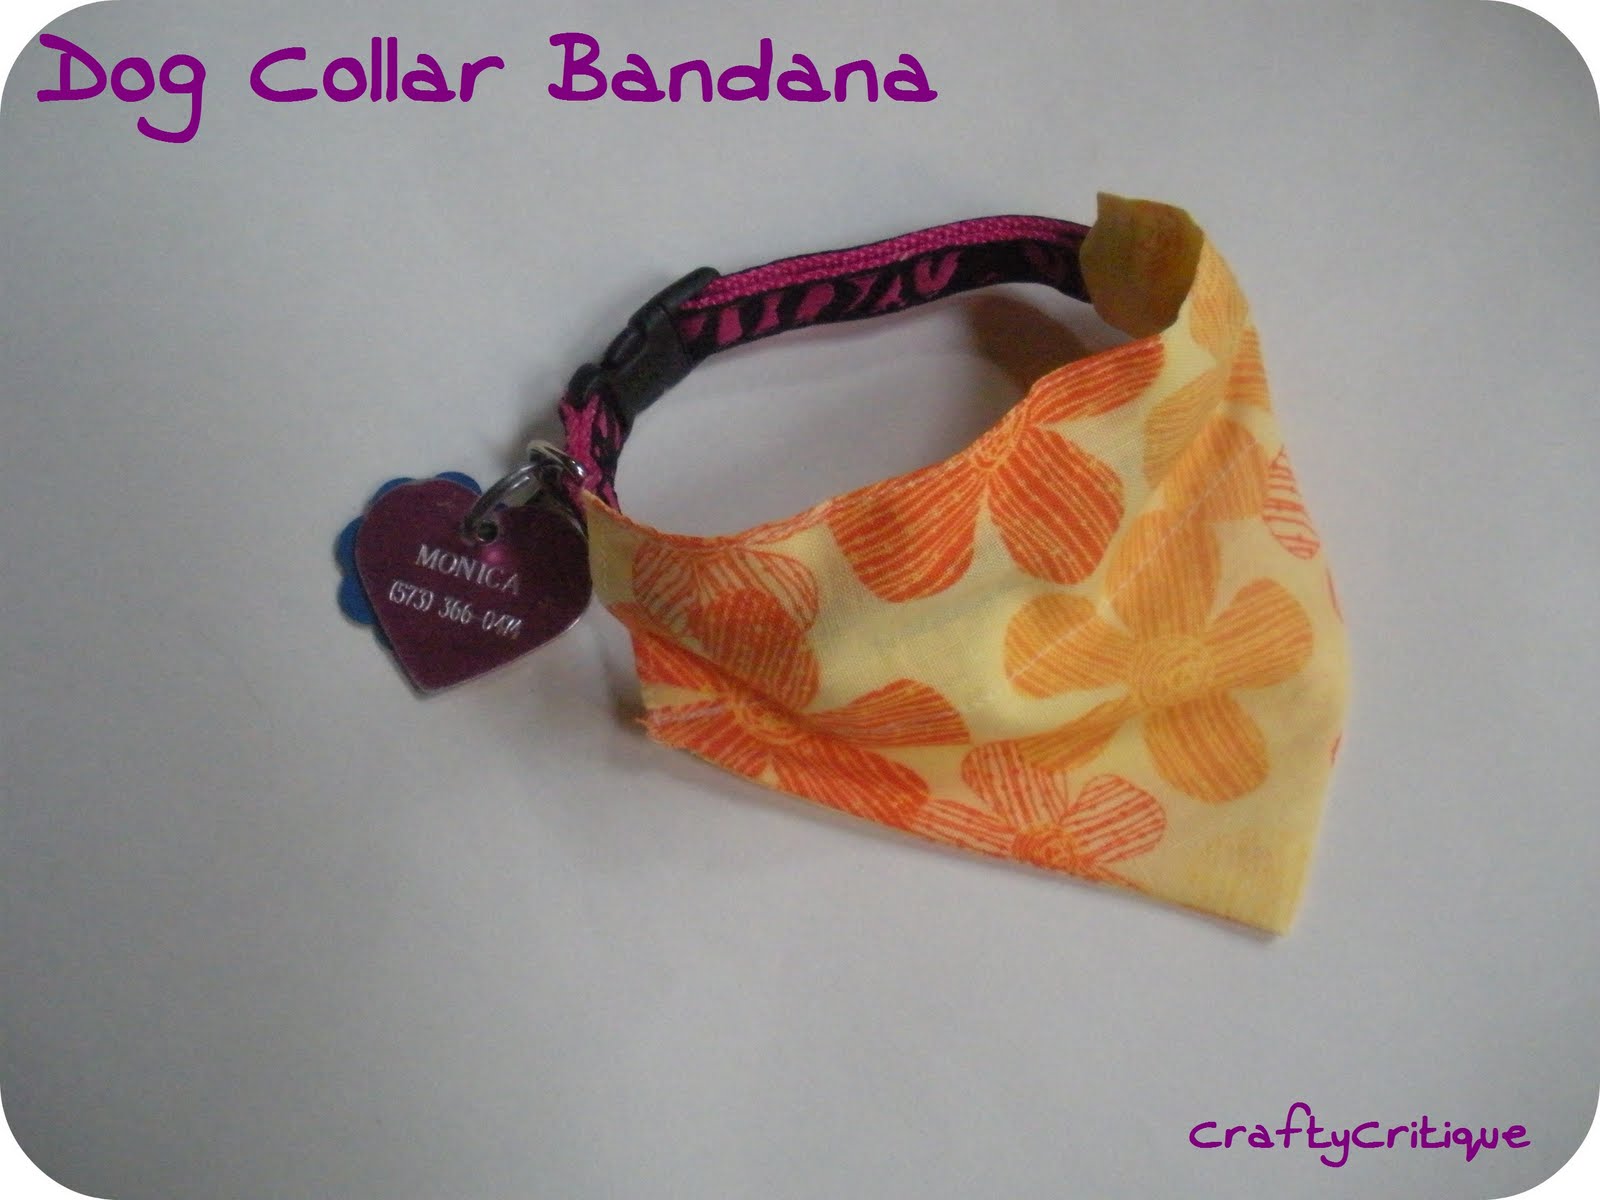 Easy Sewing Projects Using Bandanas
- Sewing